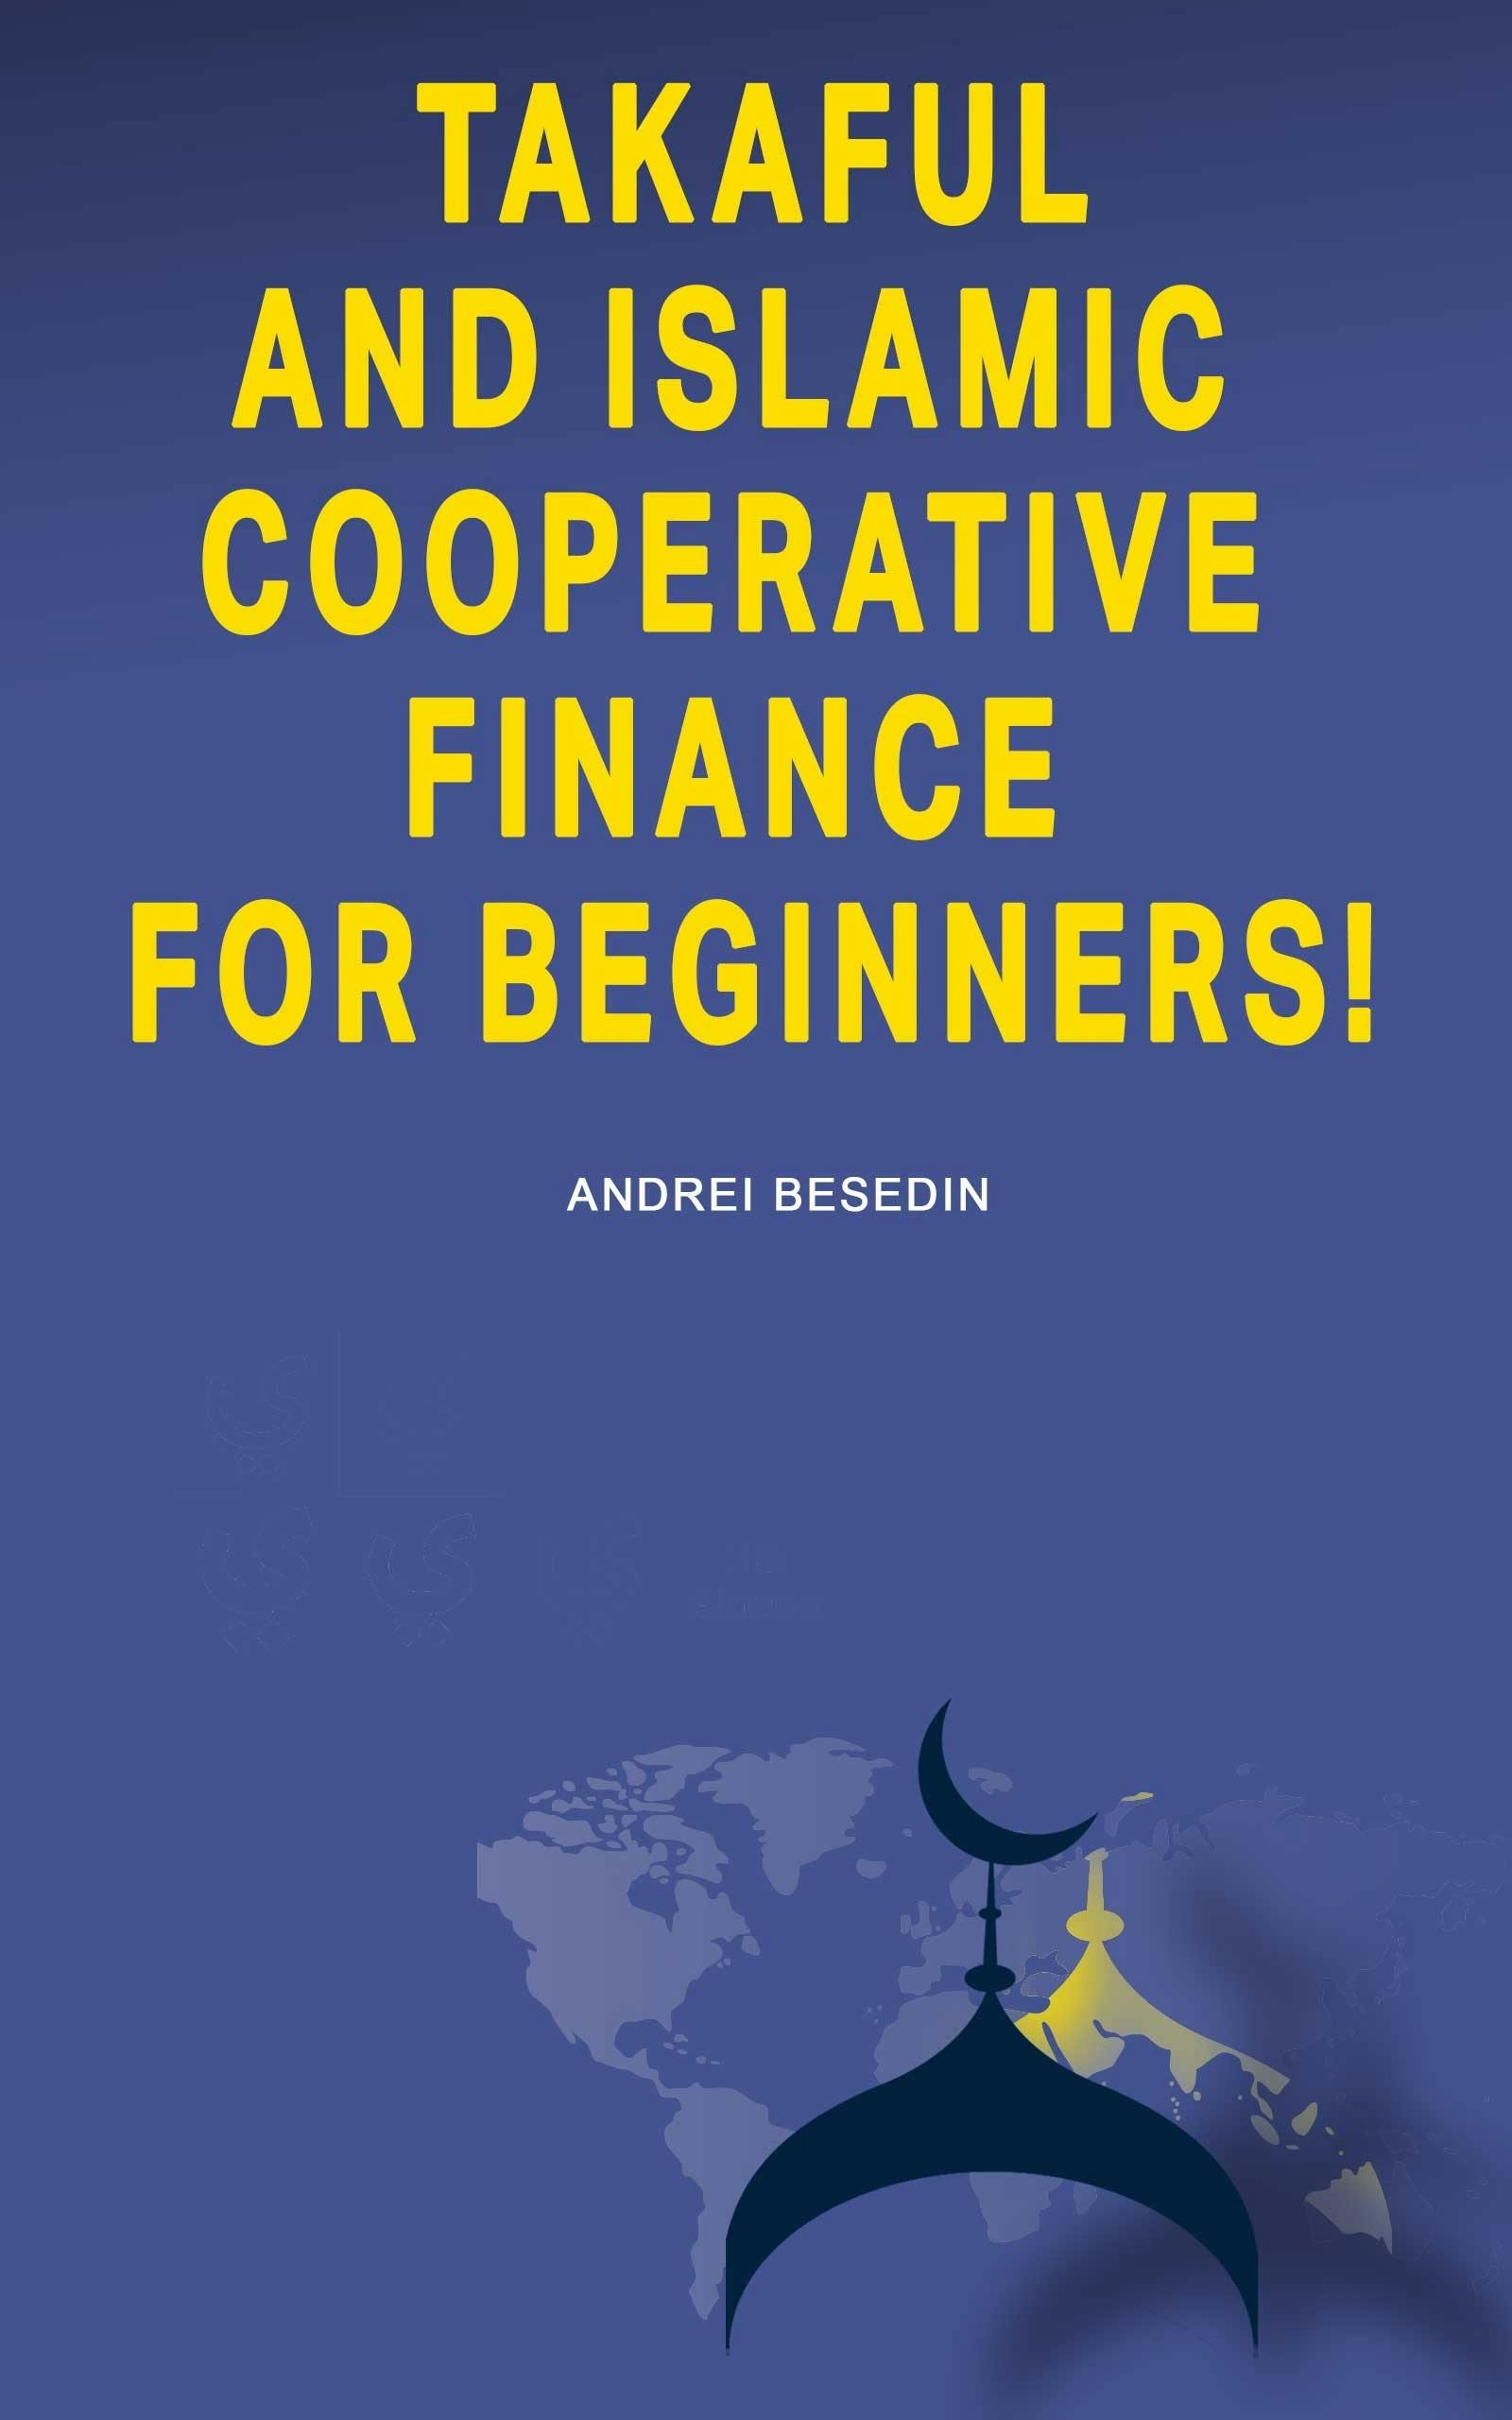 Takaful and Islamic Cooperative Finance for Beginners! - Andrei Besedin